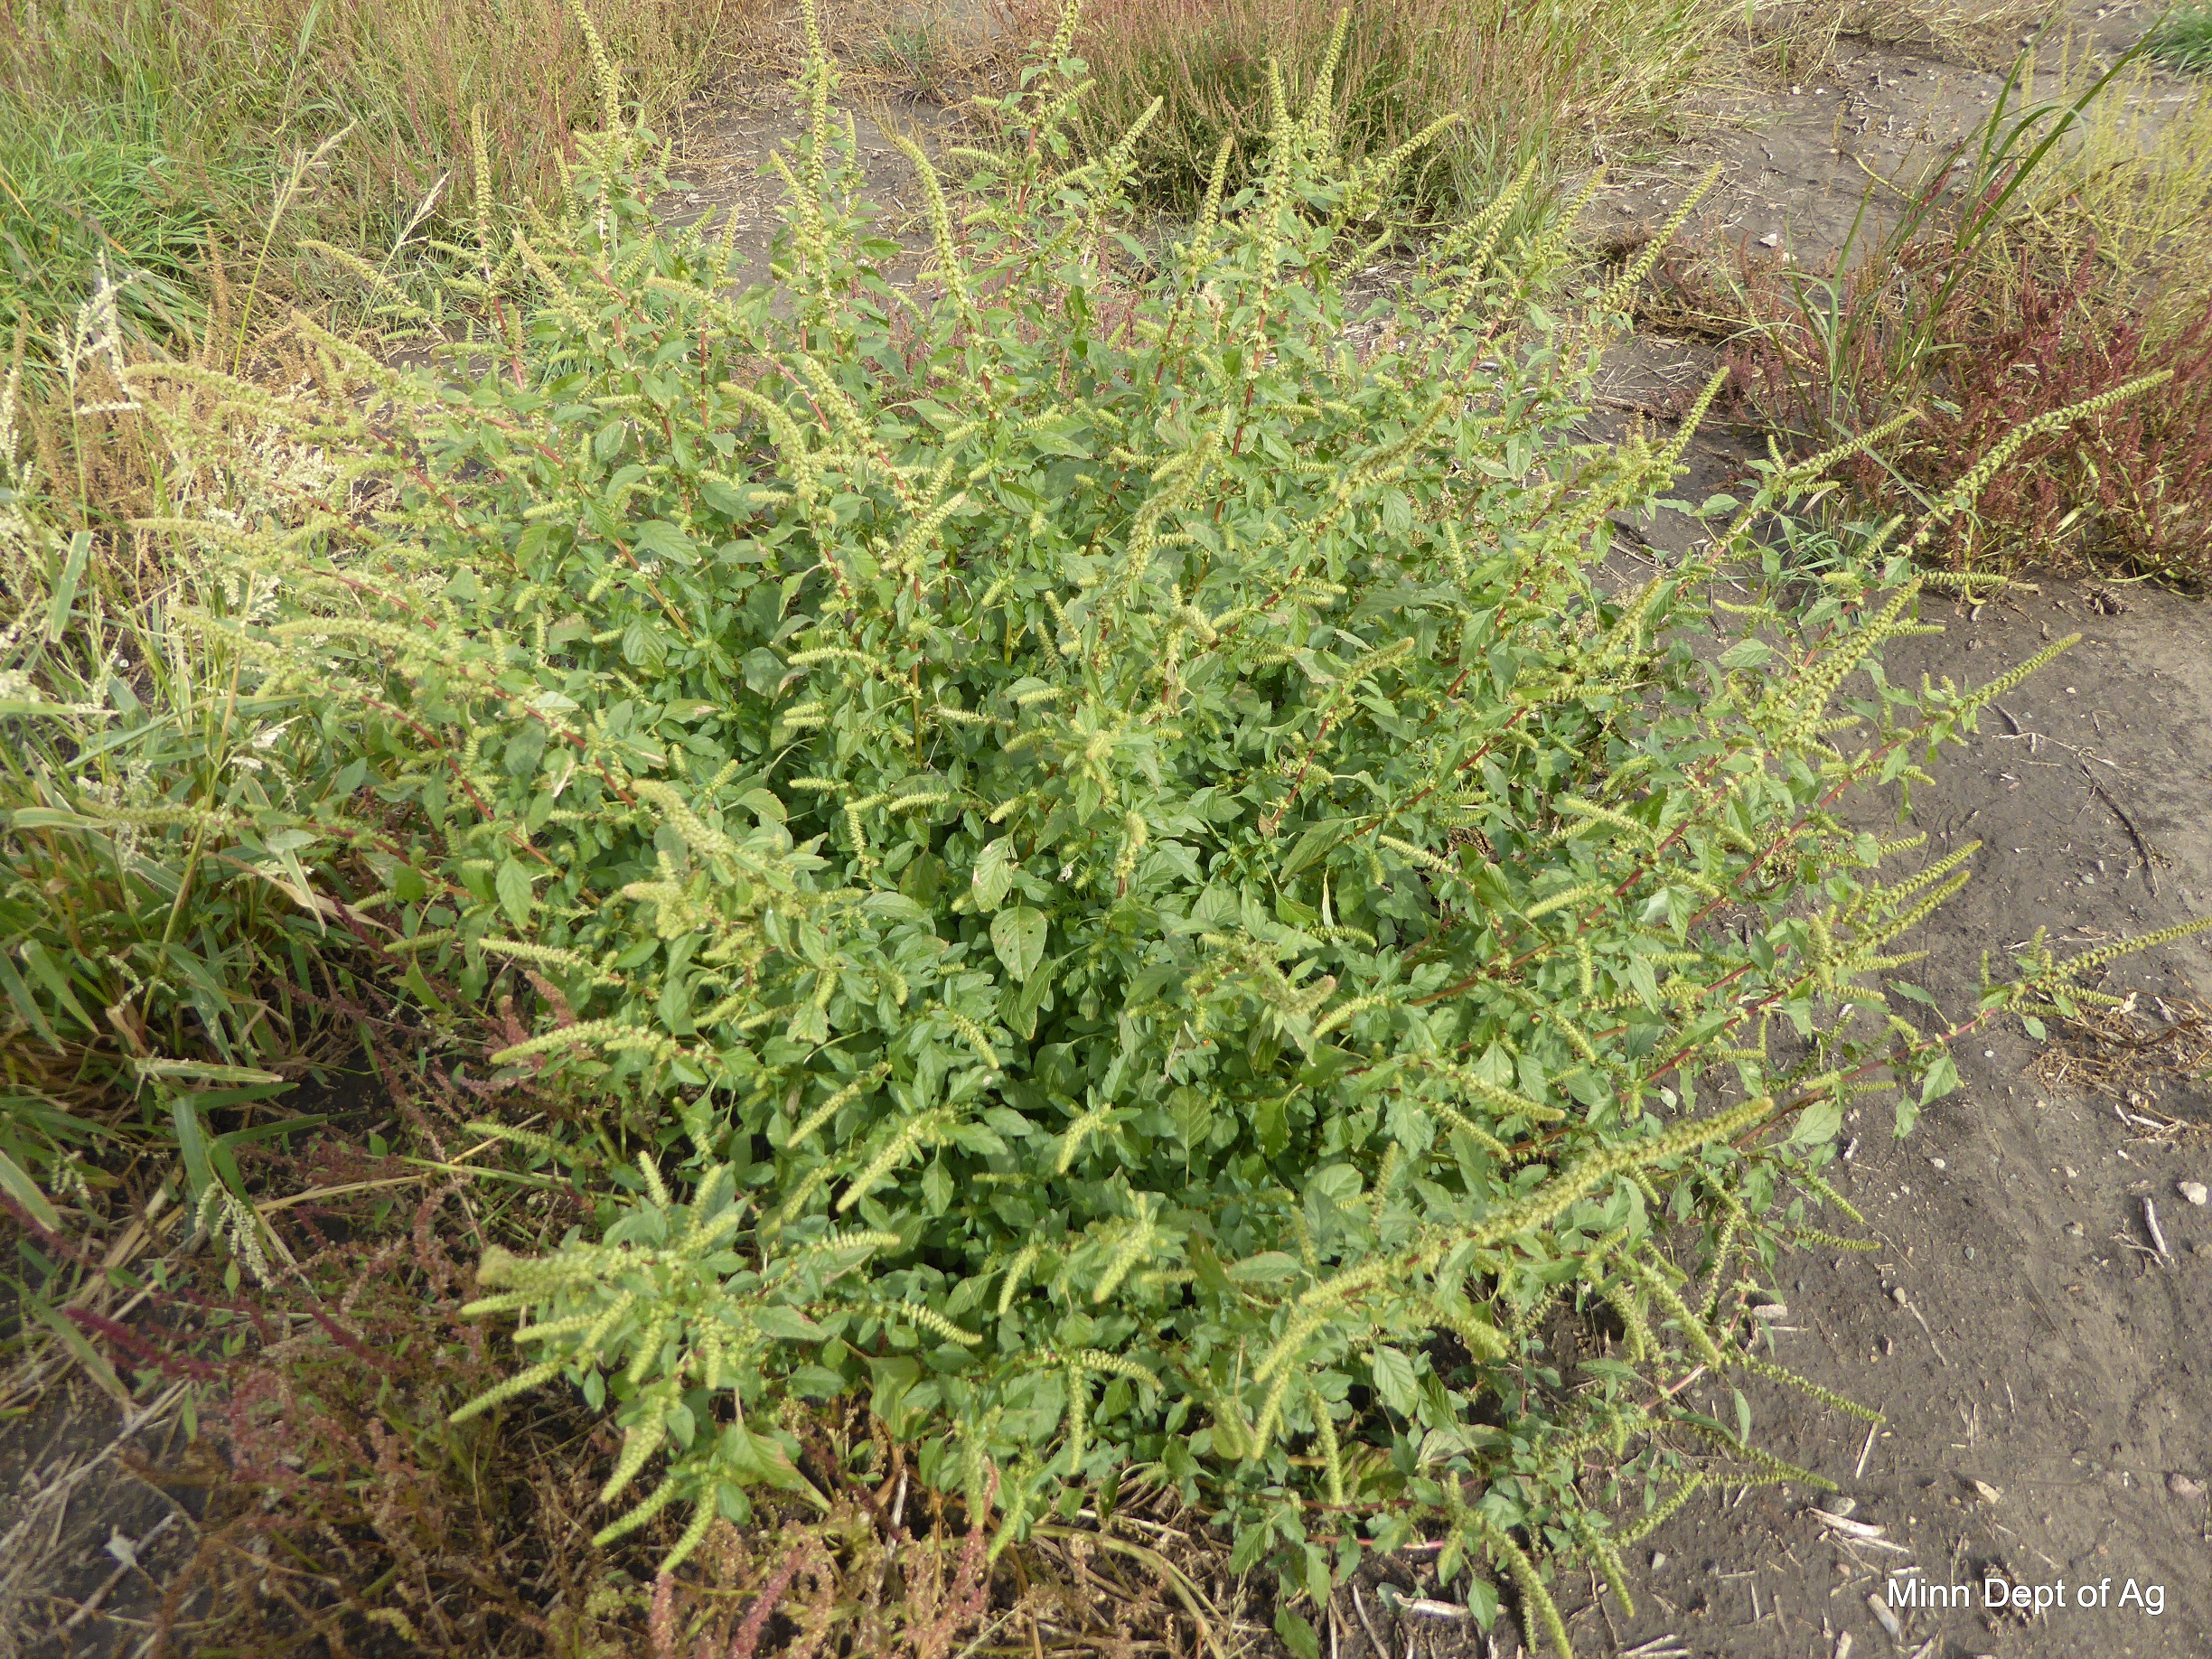 Morning Ag News, July 16, 2021: MDA helps fund the fight against noxious weeds